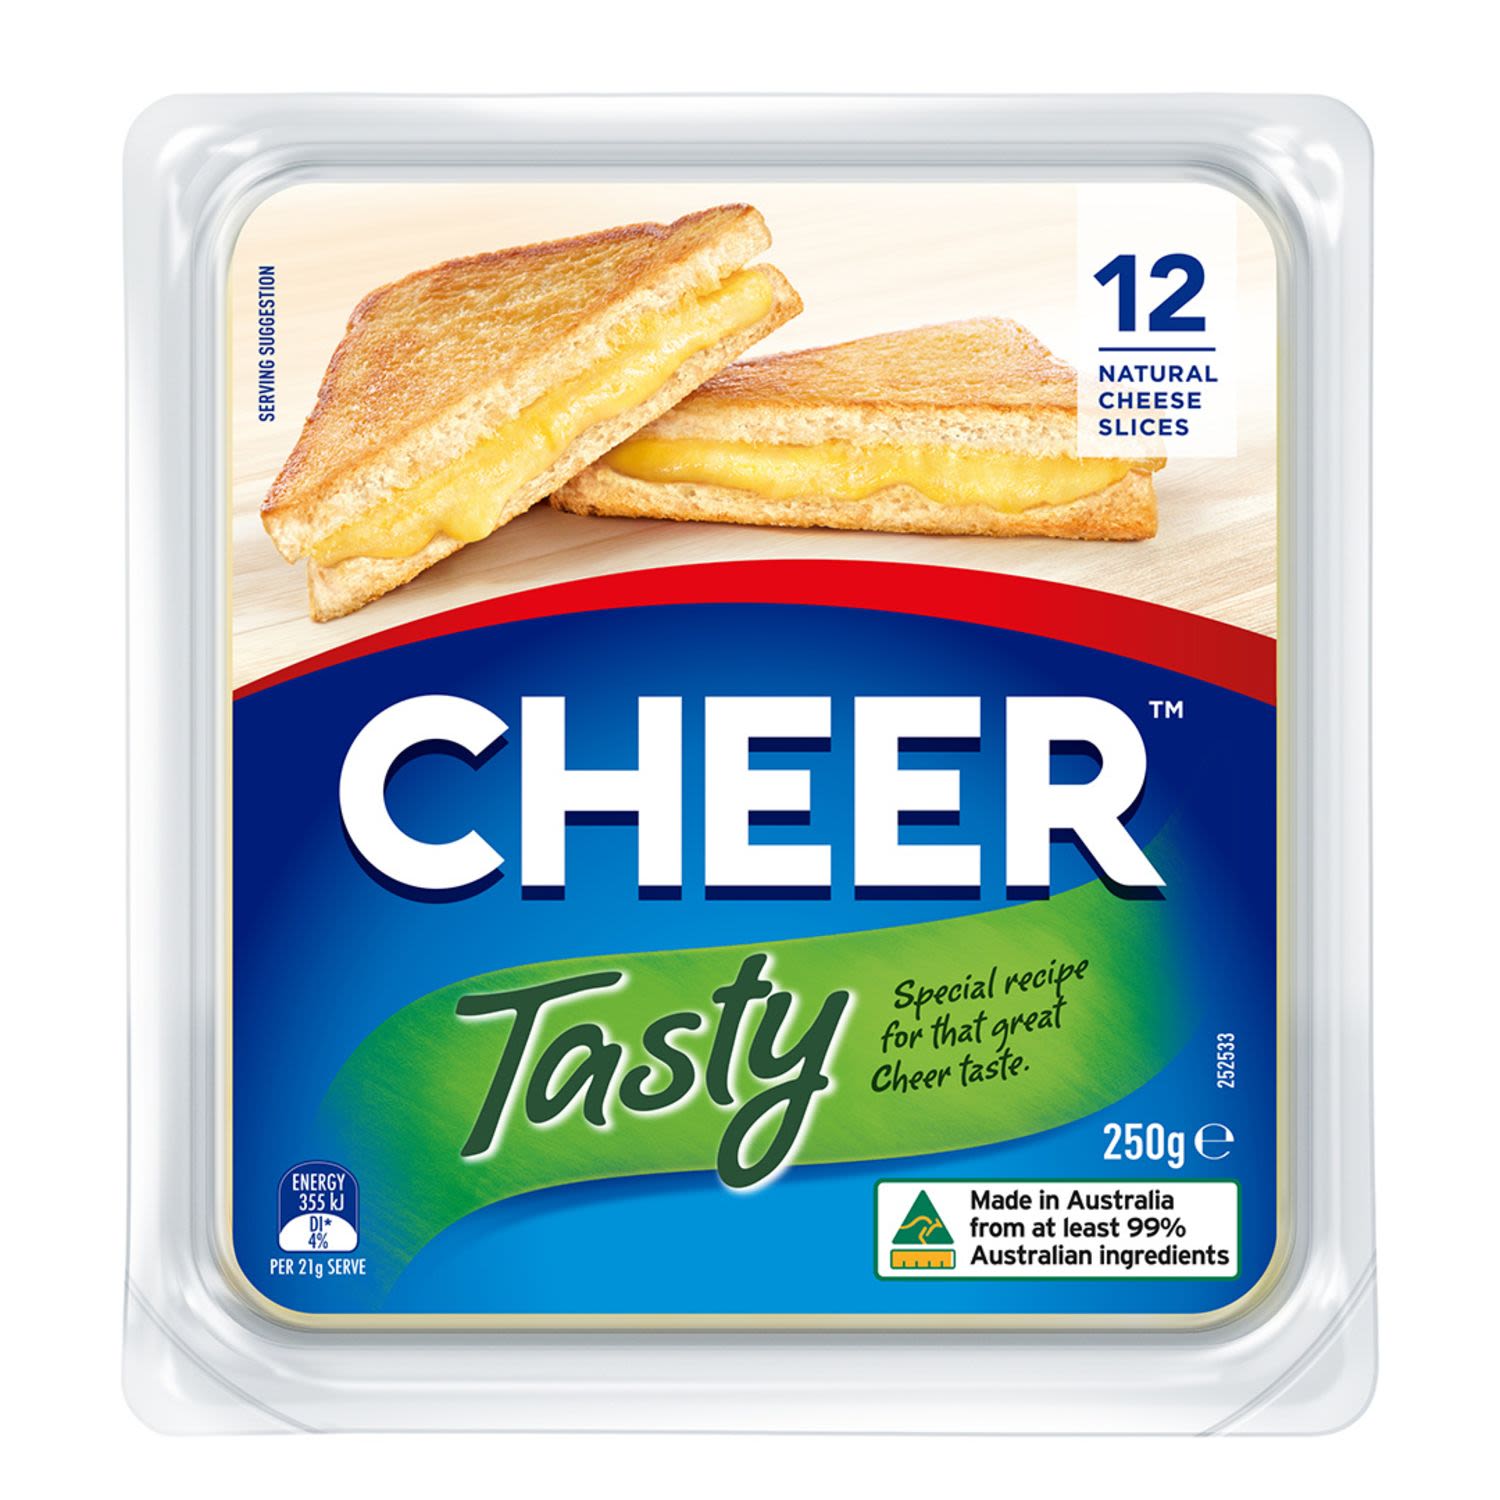 Cheer Cheese Tasty Sliced Cheese 12 Slices, 250 Gram